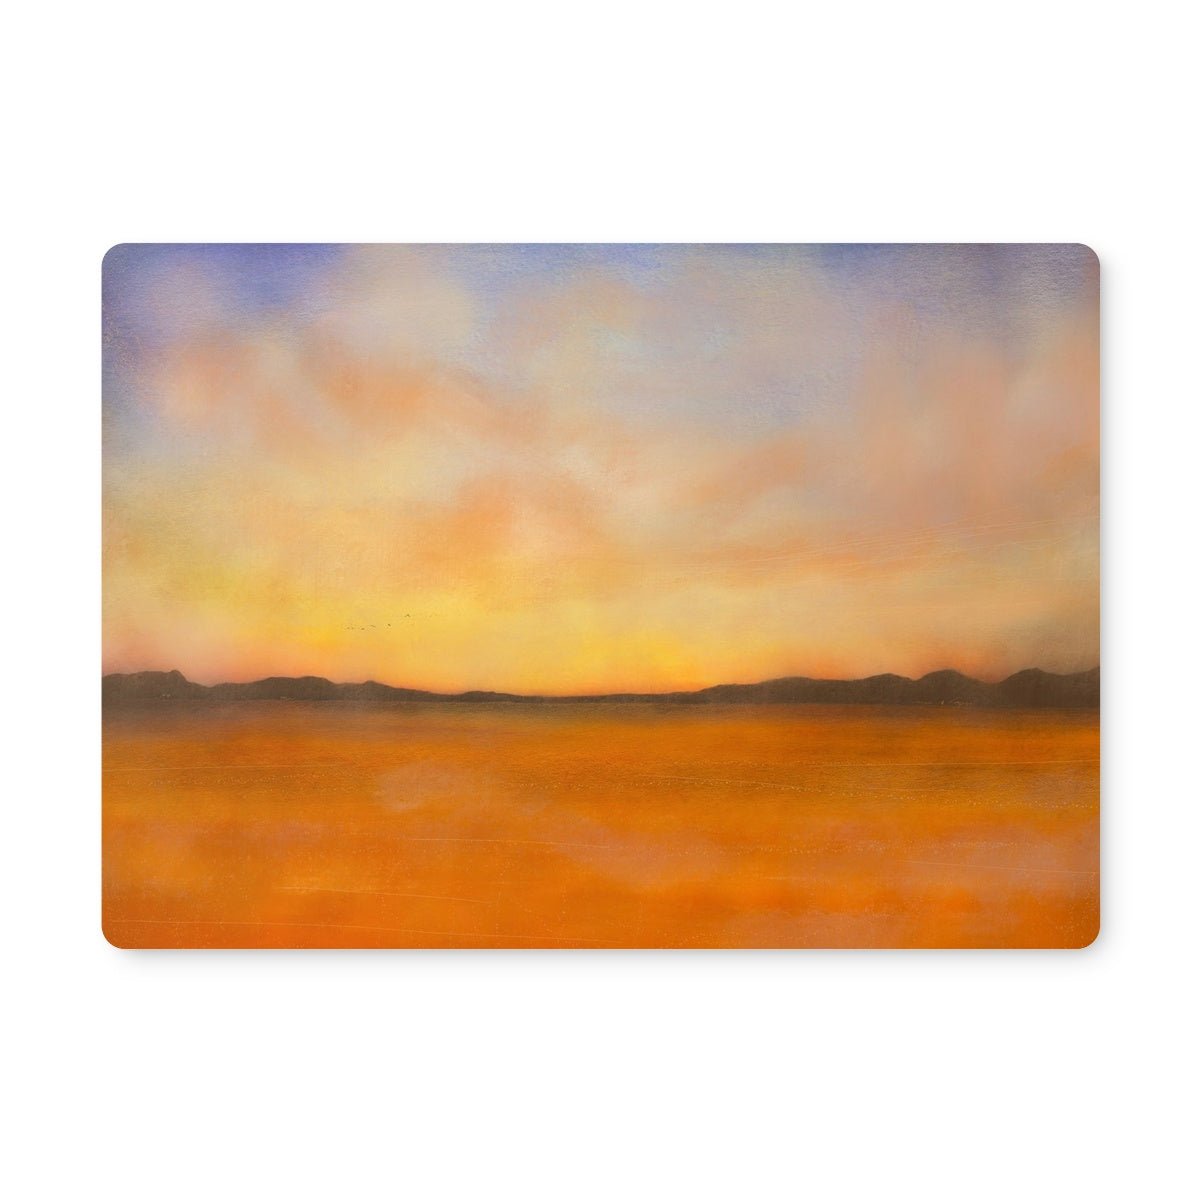 Islay Dawn Art Gifts Placemat-Placemats-Hebridean Islands Art Gallery-2 Placemats-Paintings, Prints, Homeware, Art Gifts From Scotland By Scottish Artist Kevin Hunter